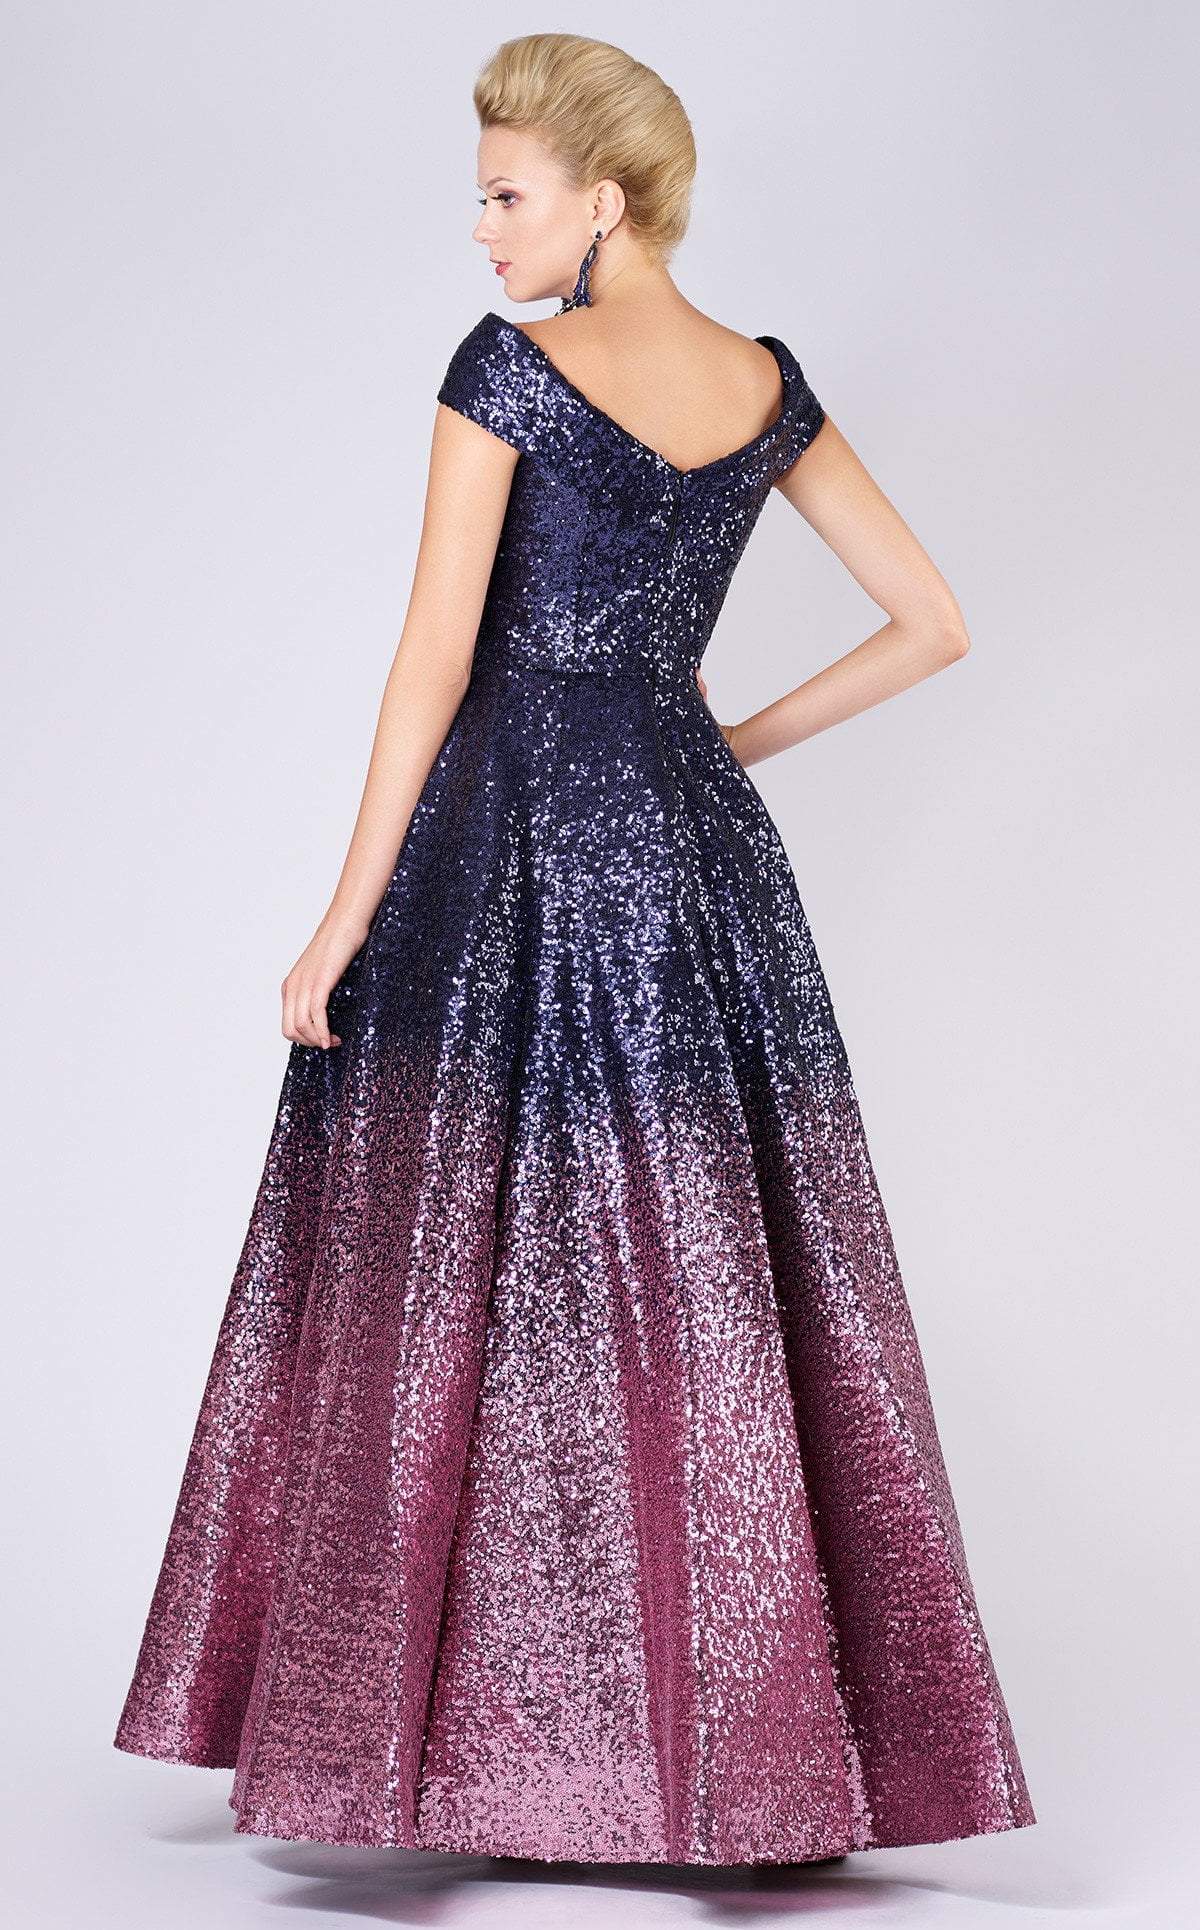 MNM COUTURE - M0009 Allover Sequin Ombre A-Line Evening Gown Special Occasion Dress